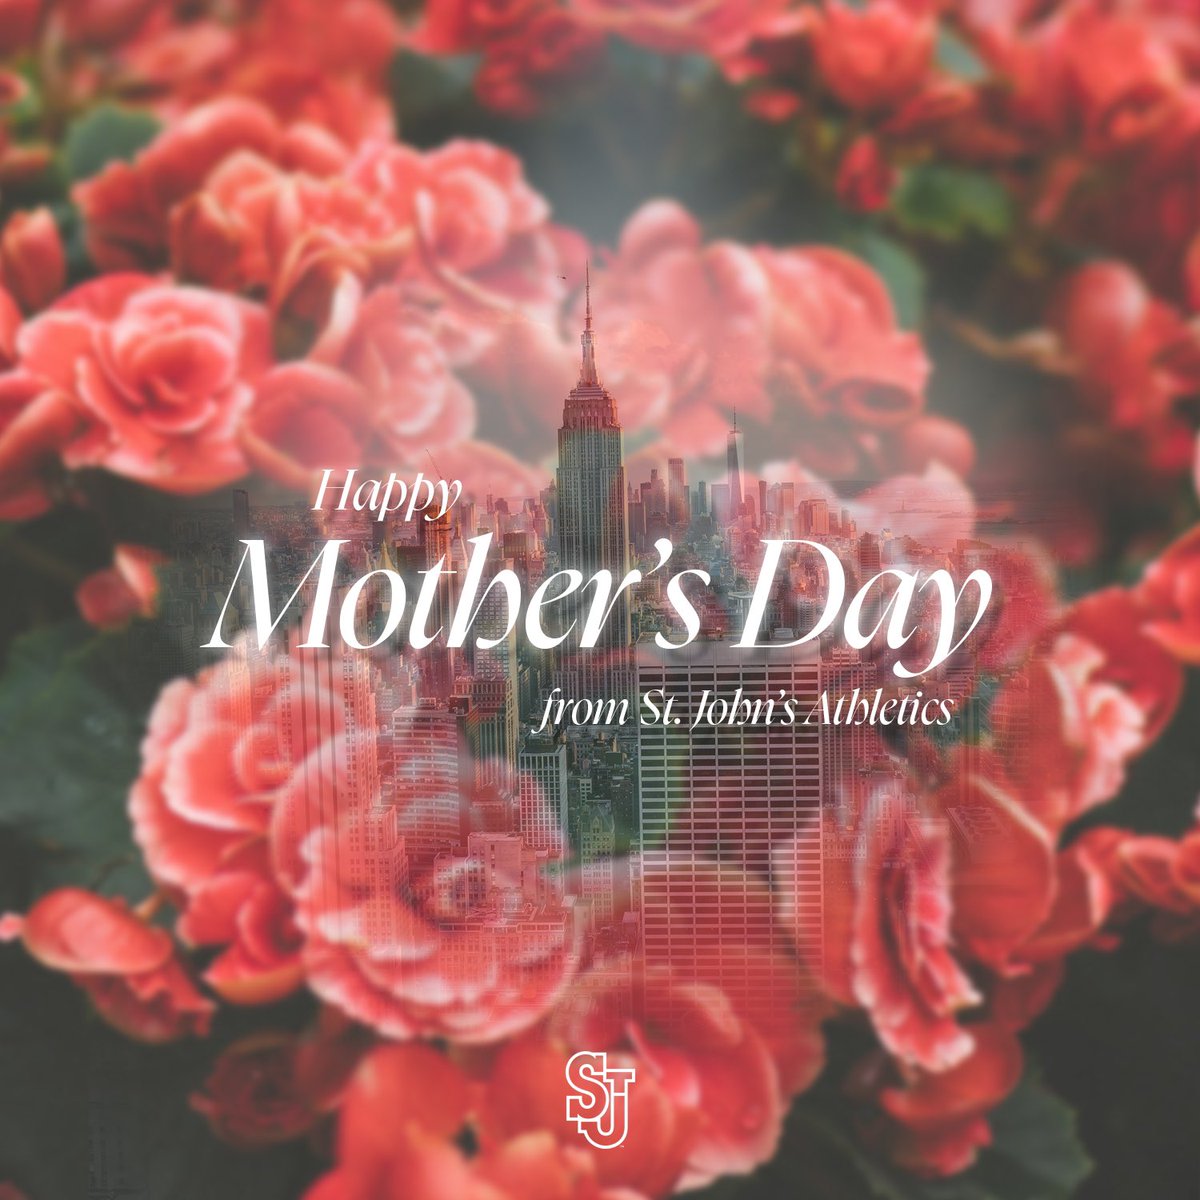 Happy Mother’s Day from St. John’s Athletics💐❤️